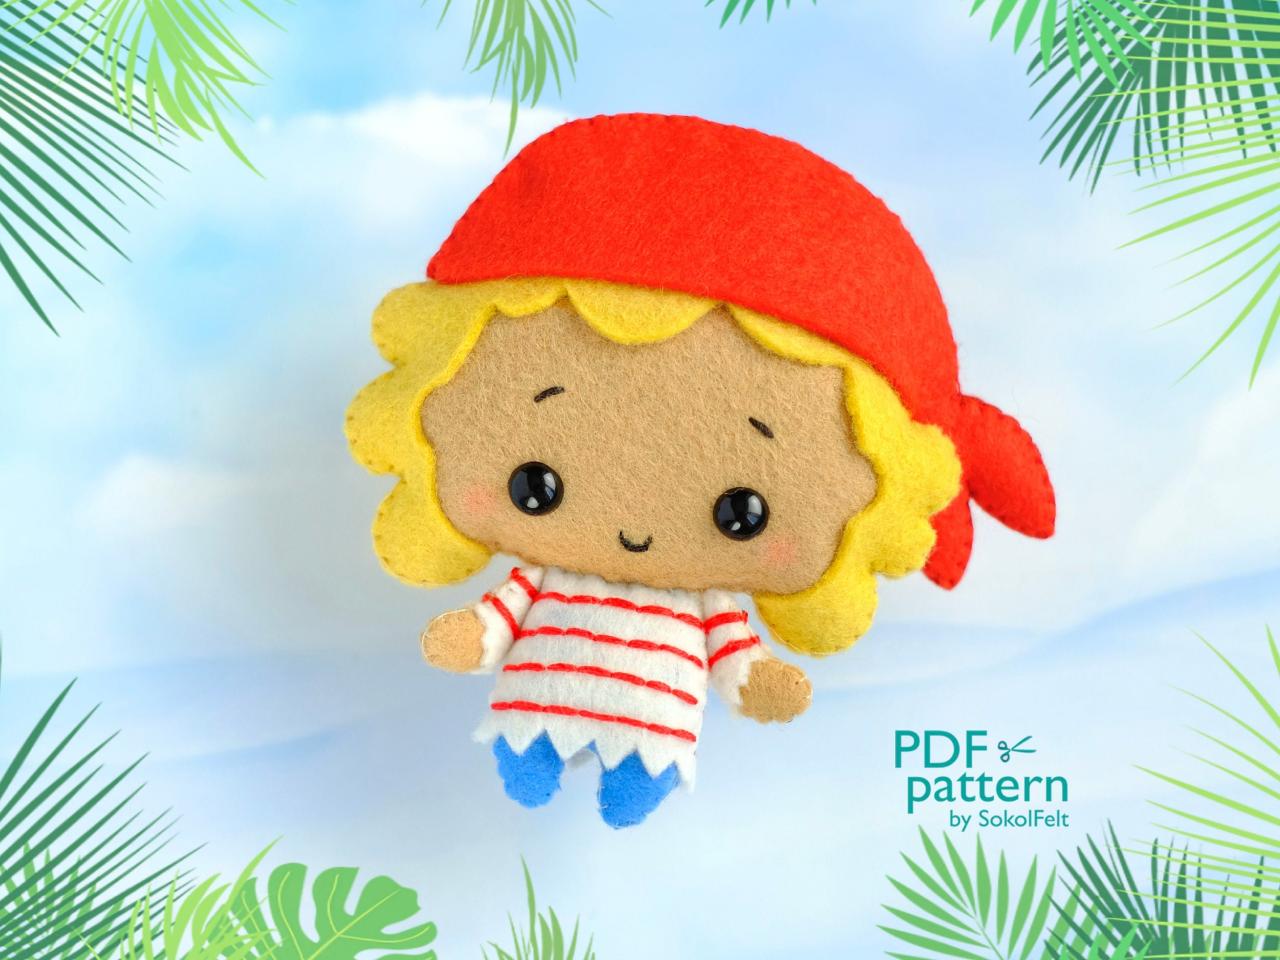 Pirate girl felt toy PDF and SVG patterns, Plush doll sewing PDF tutorial, baby crib mobile toy, Pirate banner